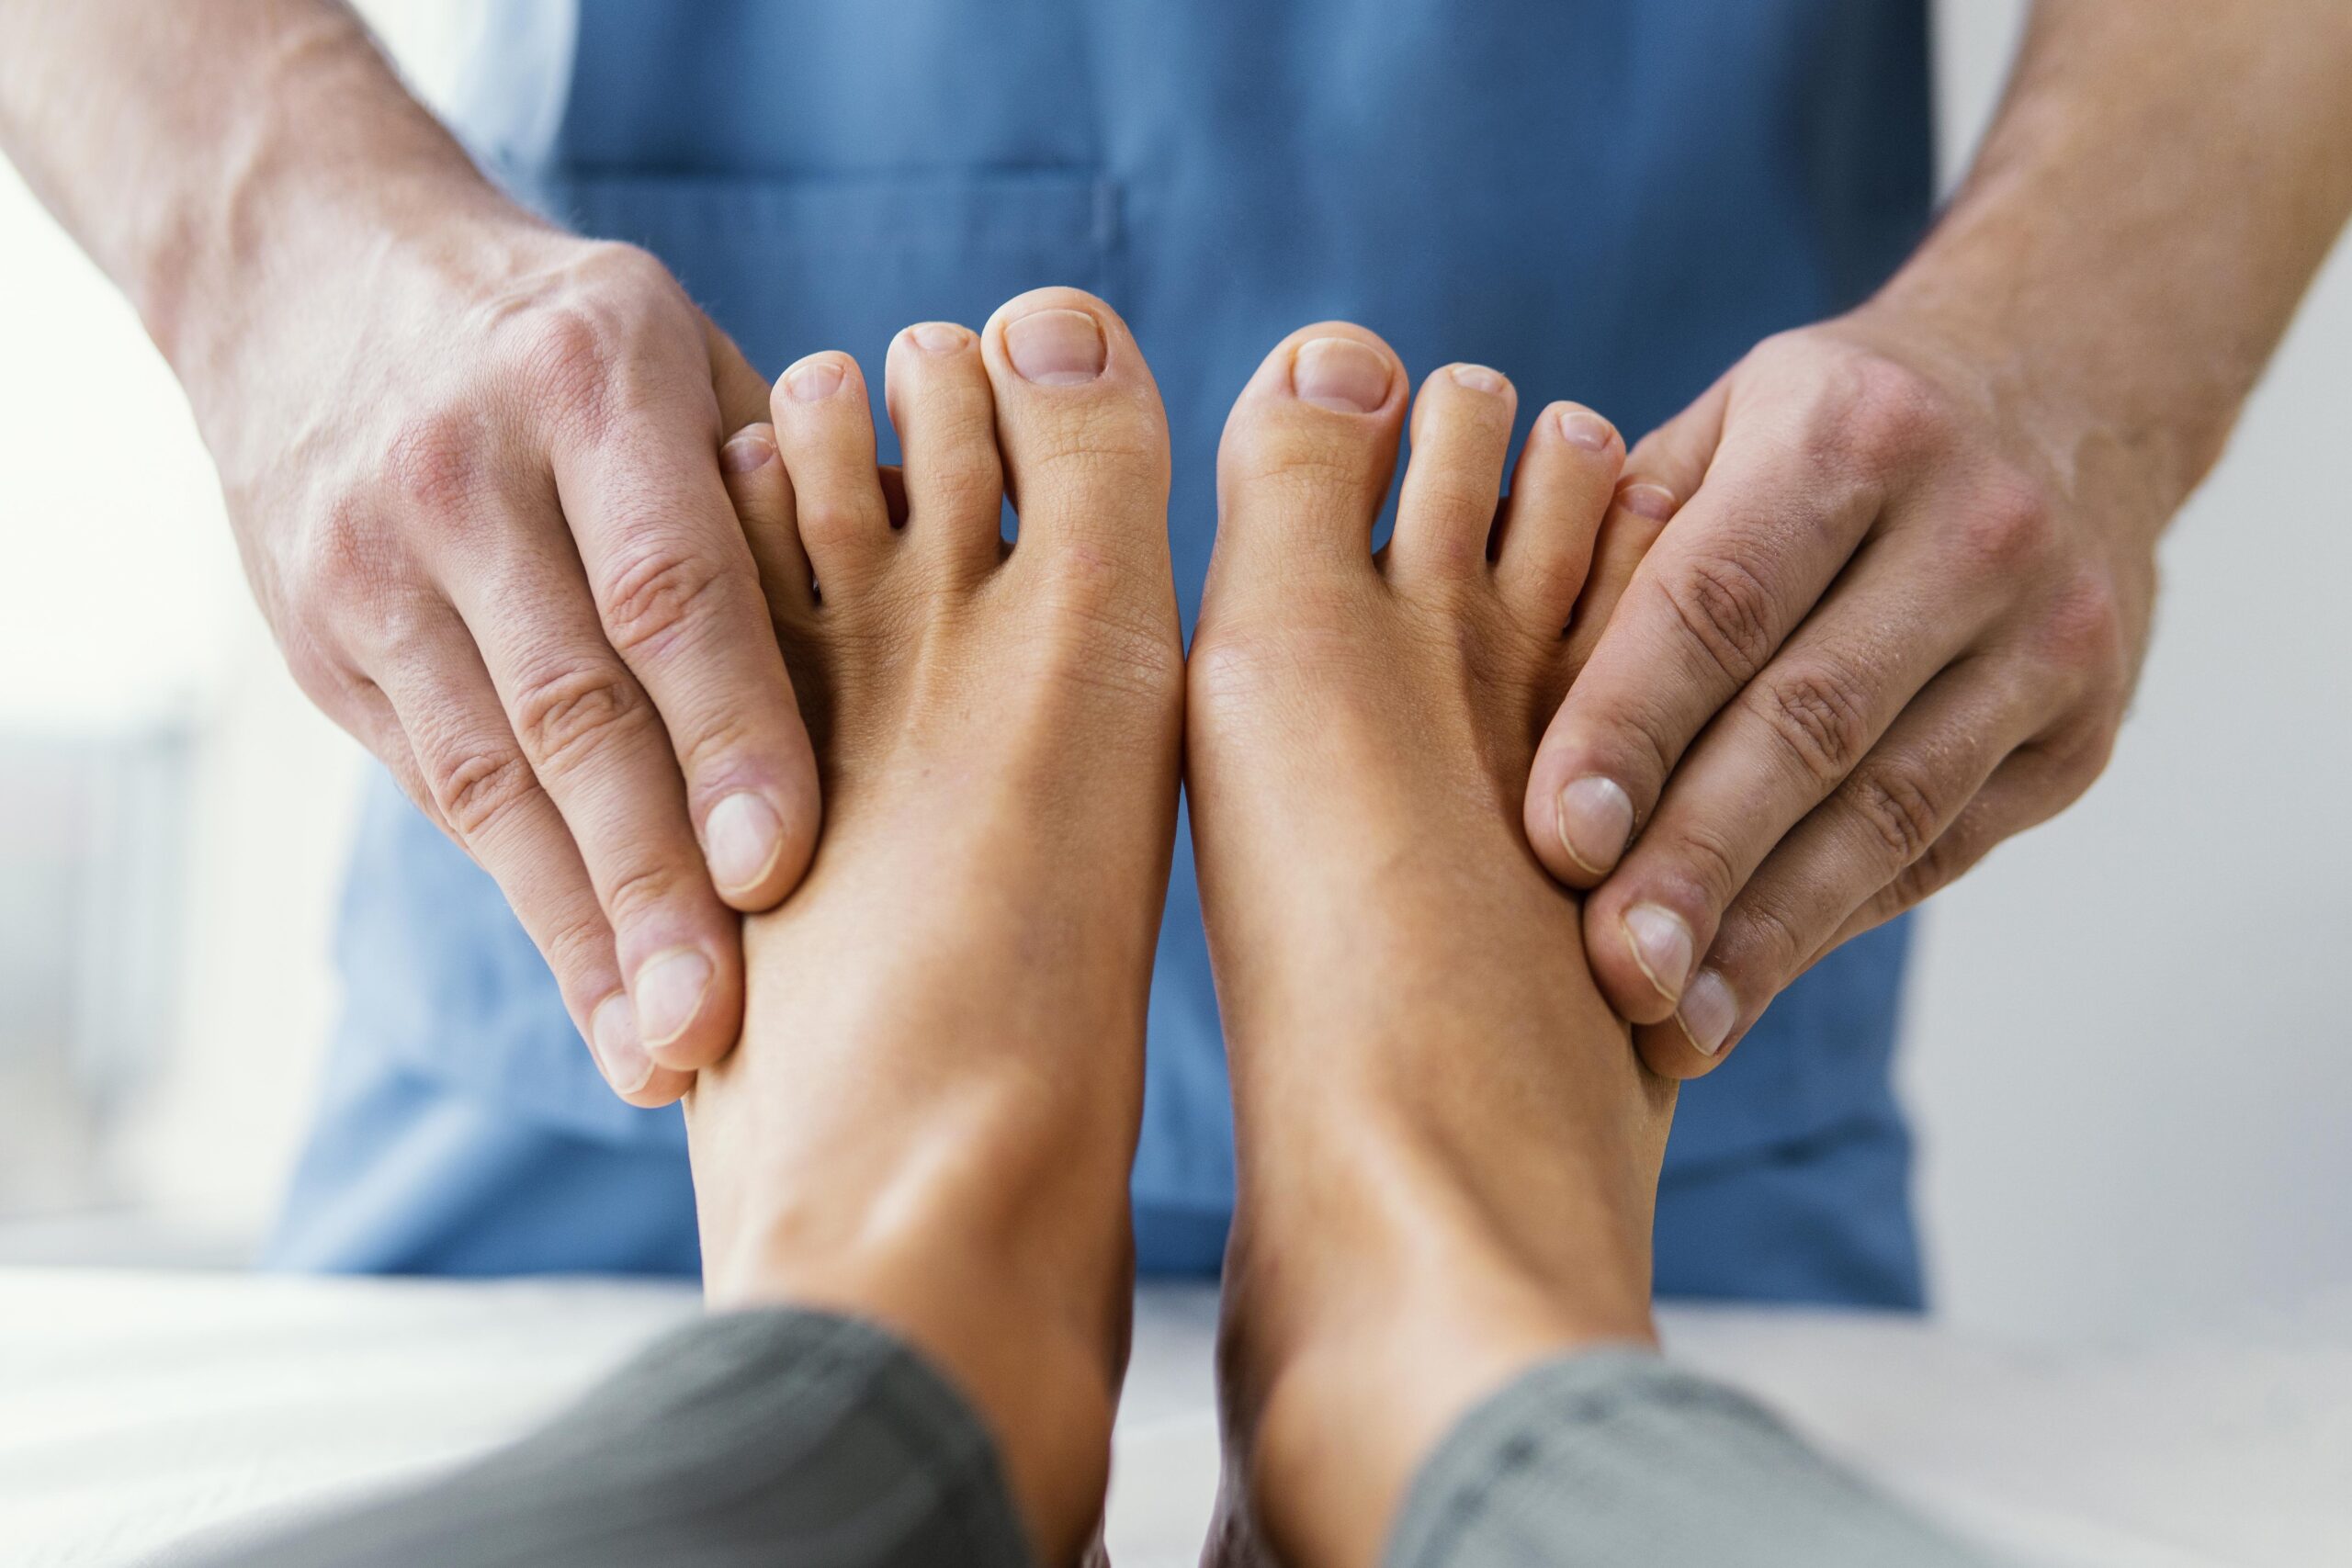 Doctor giving a foot examination